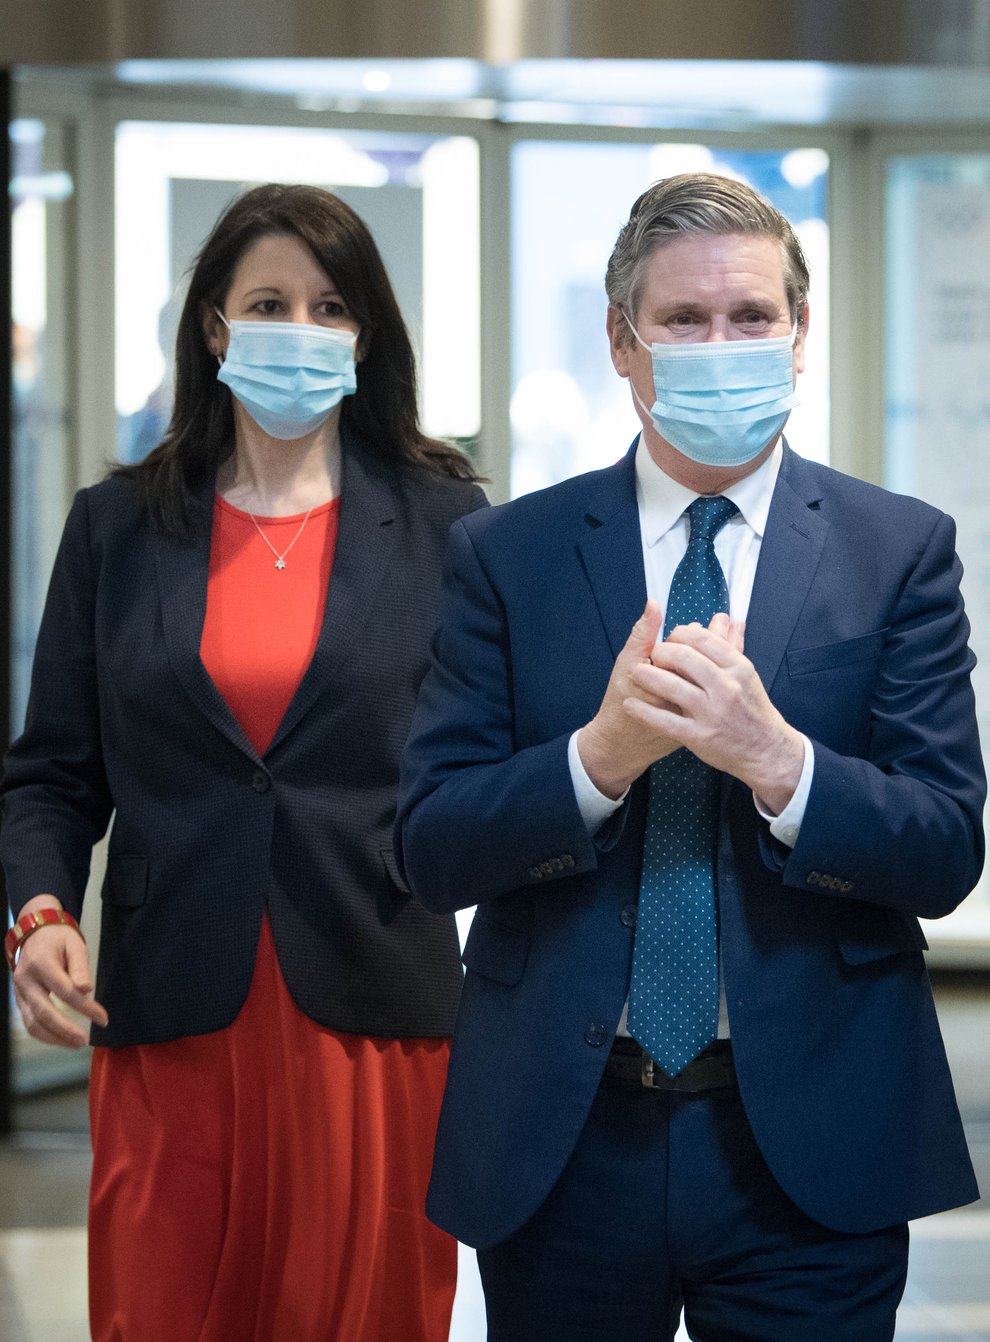 Sir Keir Starmer with Rachel Reeves who has been promoted to shadow chancellor